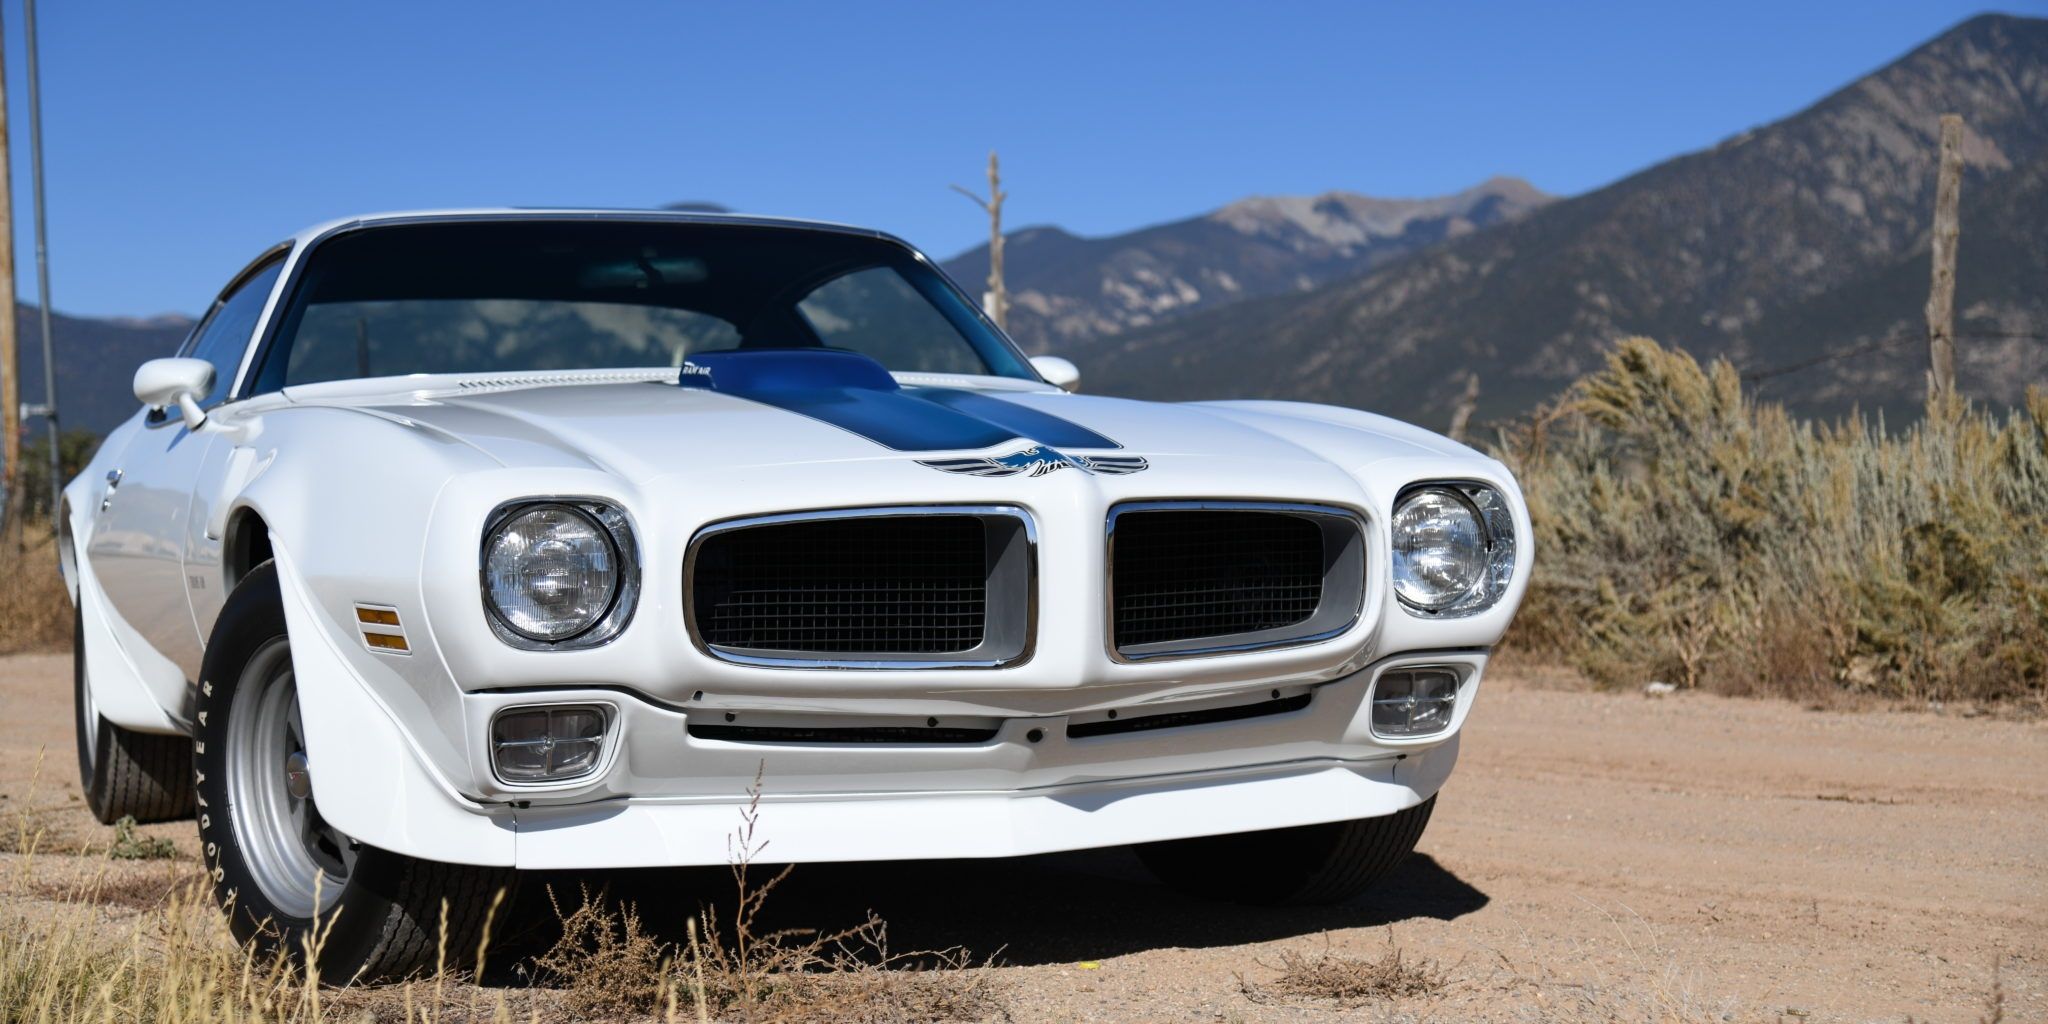 A 1970 Pontiac Trans Am Parked On A Mountain Road